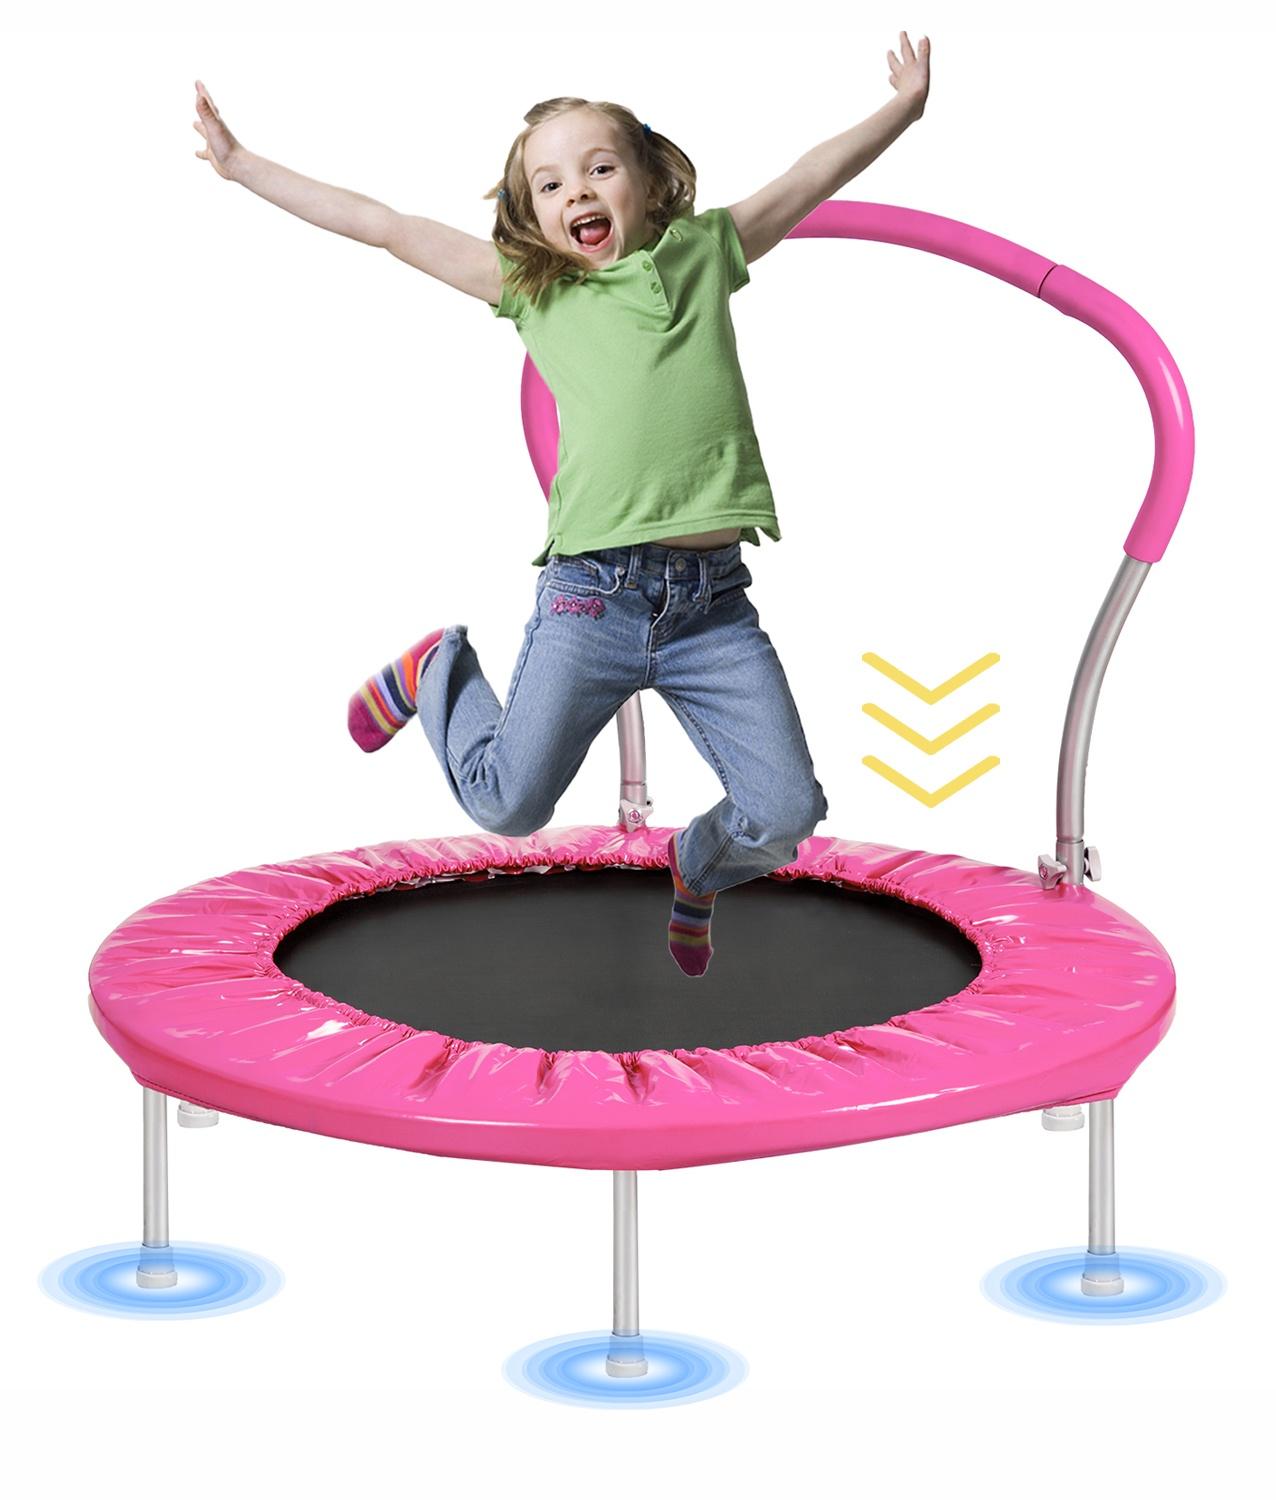 Seizeen 36'' Small Kids Trampoline, Toddler Trampoline Foldable Rebounder with Handle, Mini Trampoline for Indoor Outdoor, Gift for 3-7 Years Boys and Girls - image 1 of 9